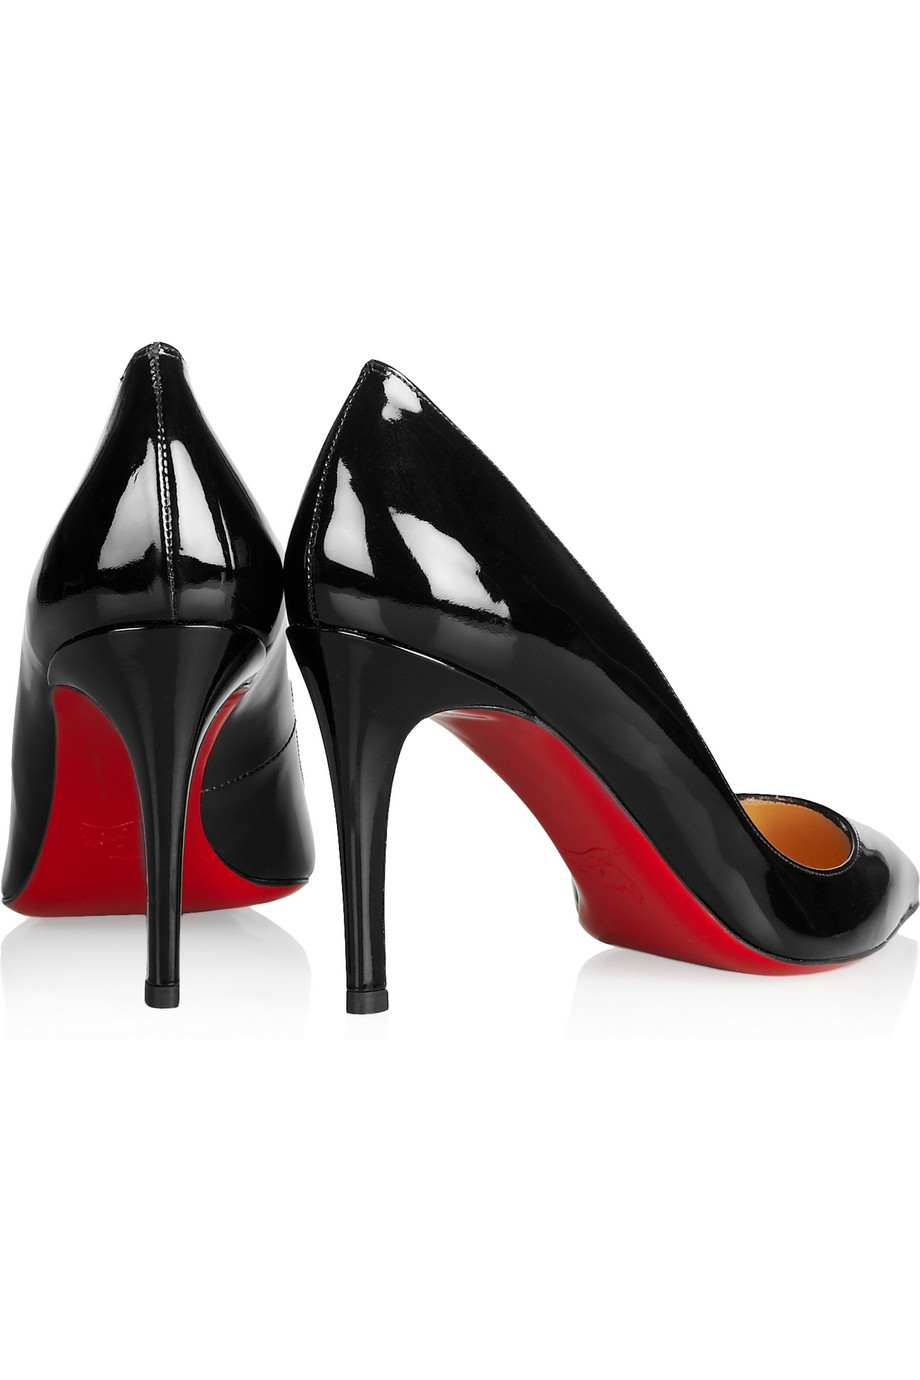 Lyst - Christian Louboutin The Pigalle 85 Patentleather Pumps in Black